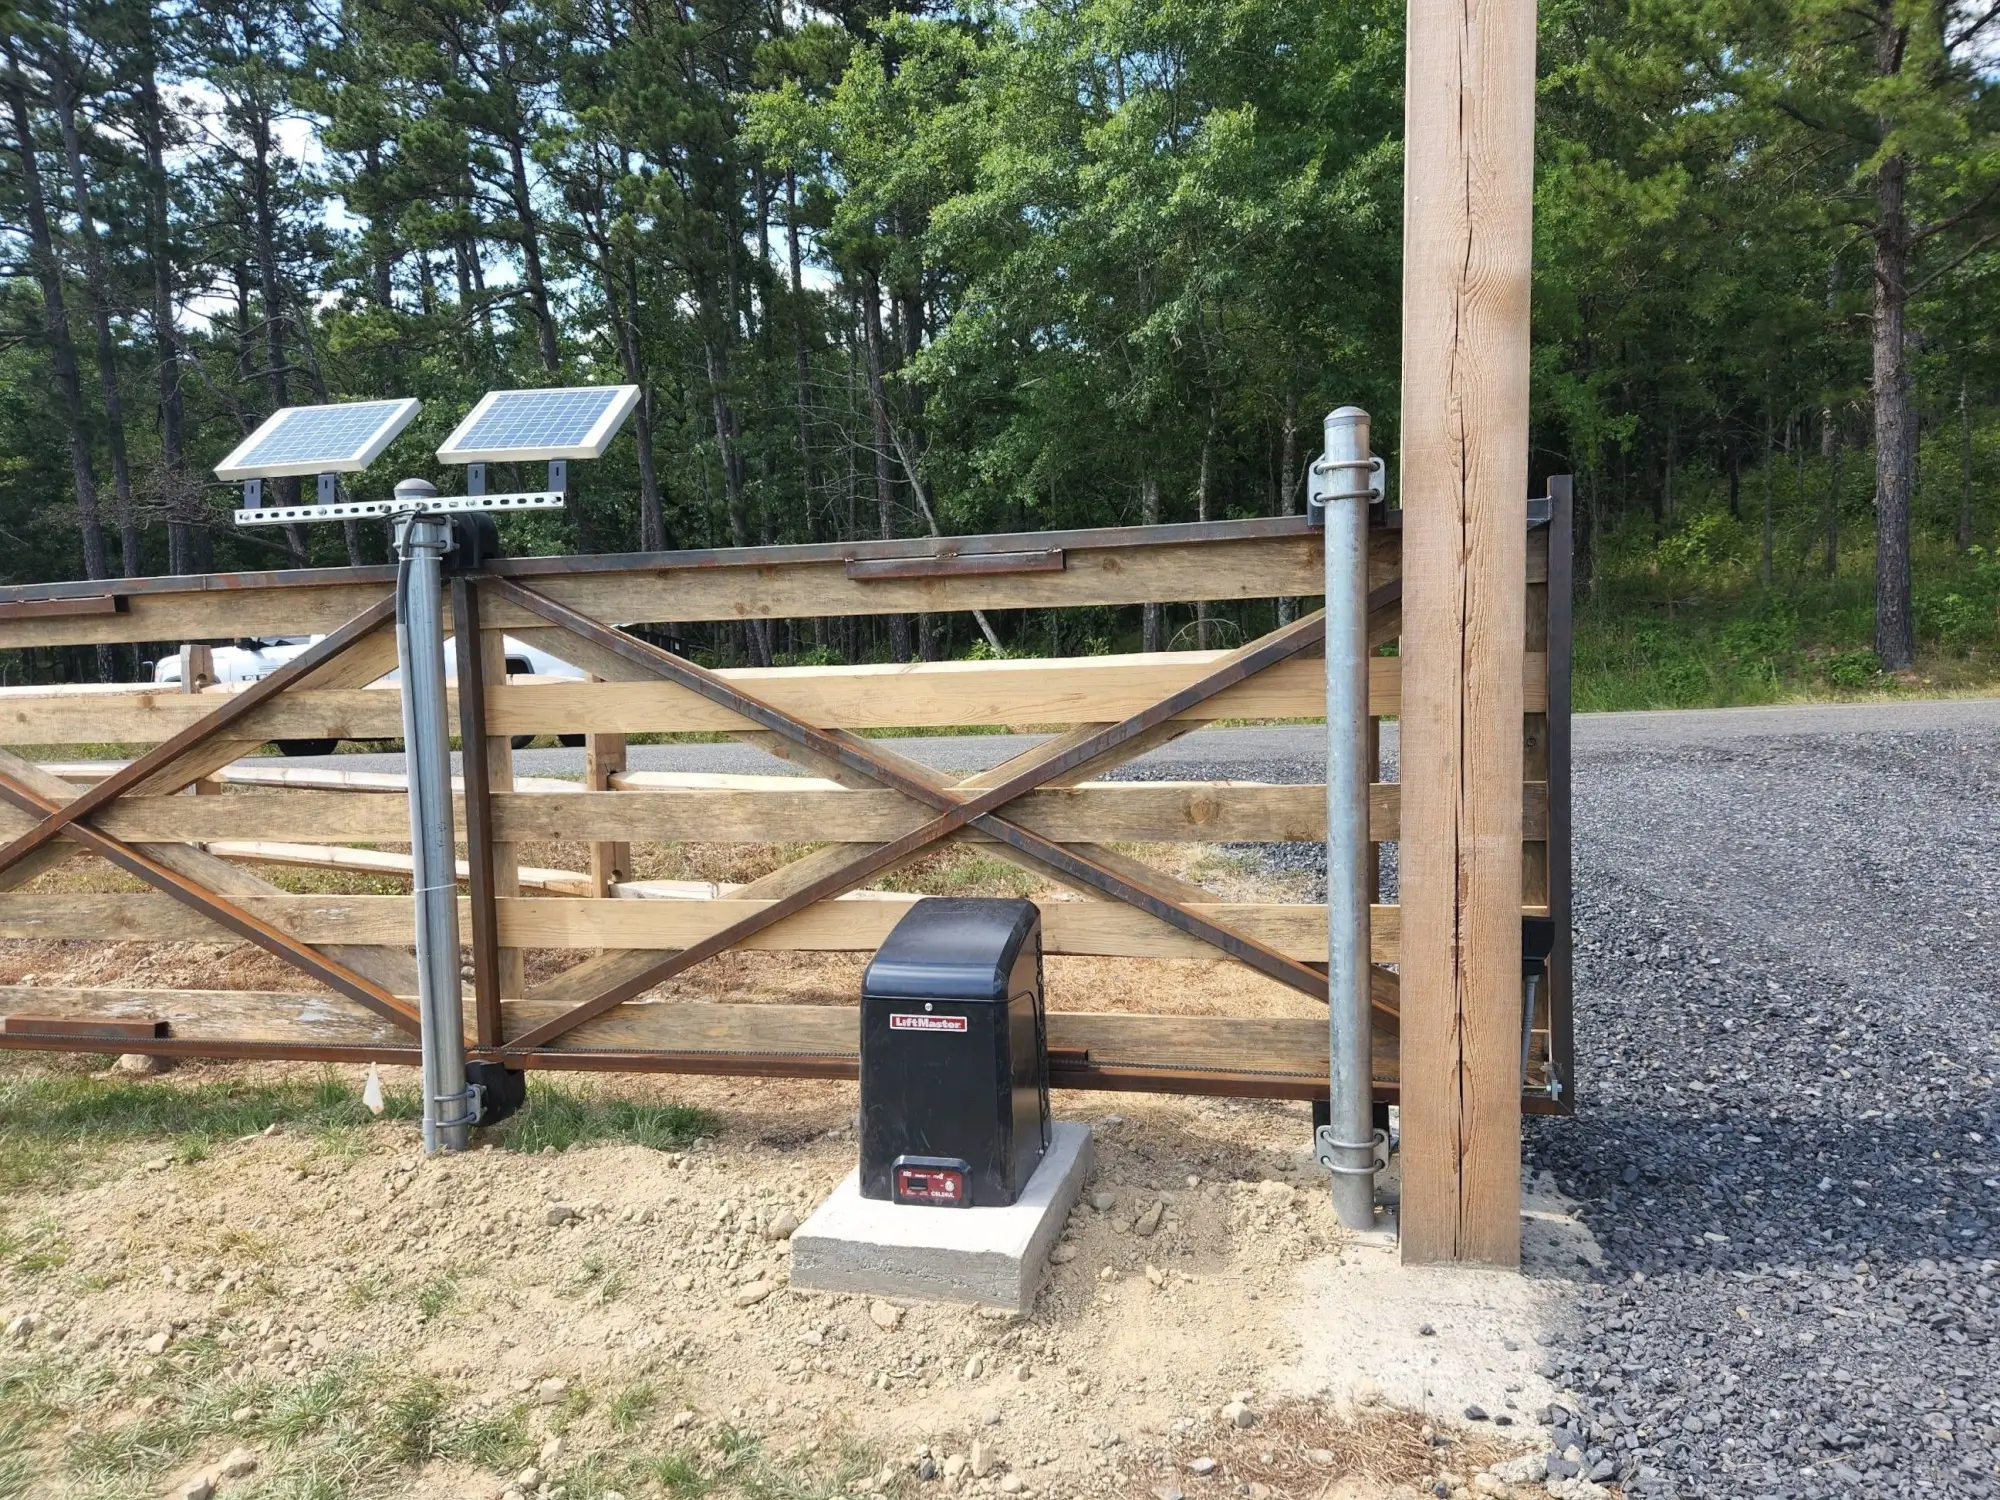 Wooden gate with liftmaster gate access control